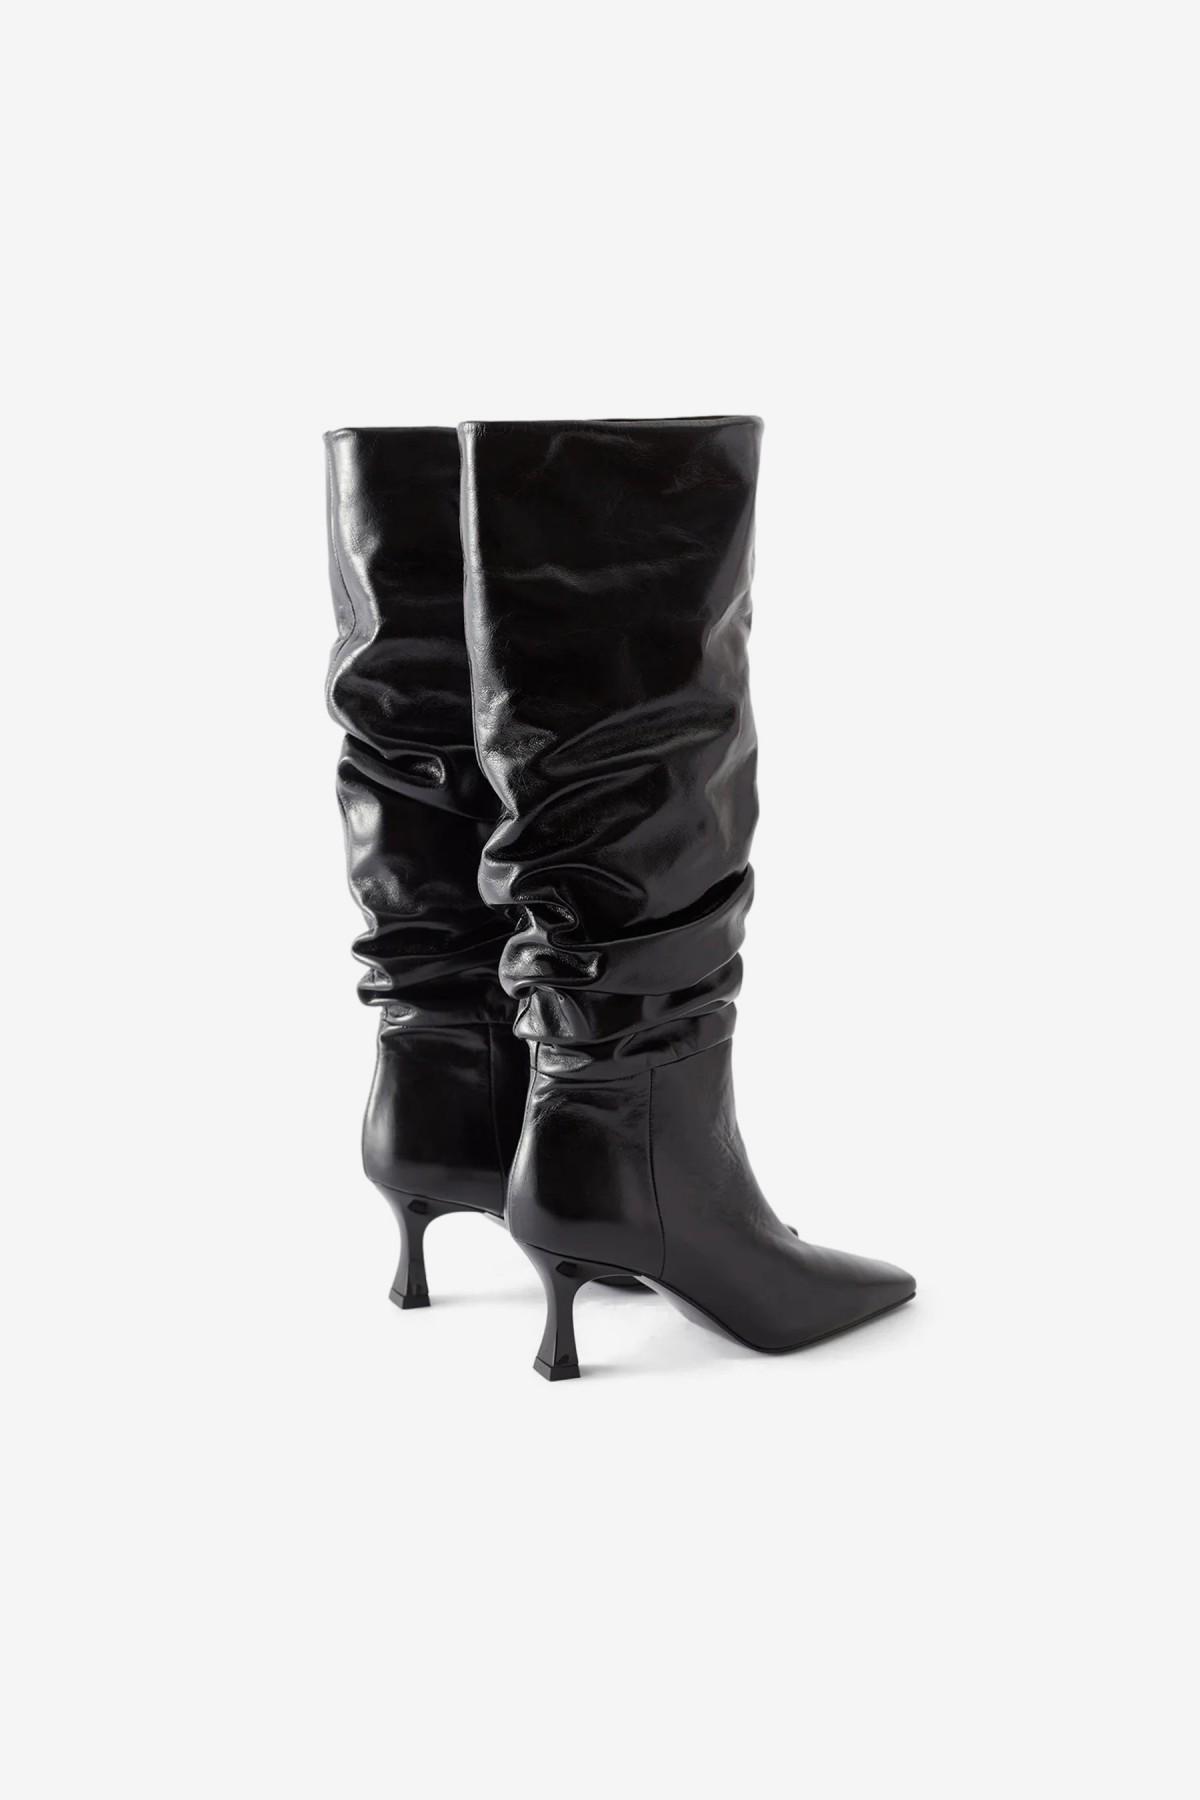 Rejina Pyo Slouchy Knee High Boot in Leather Crinkle Shiny Black